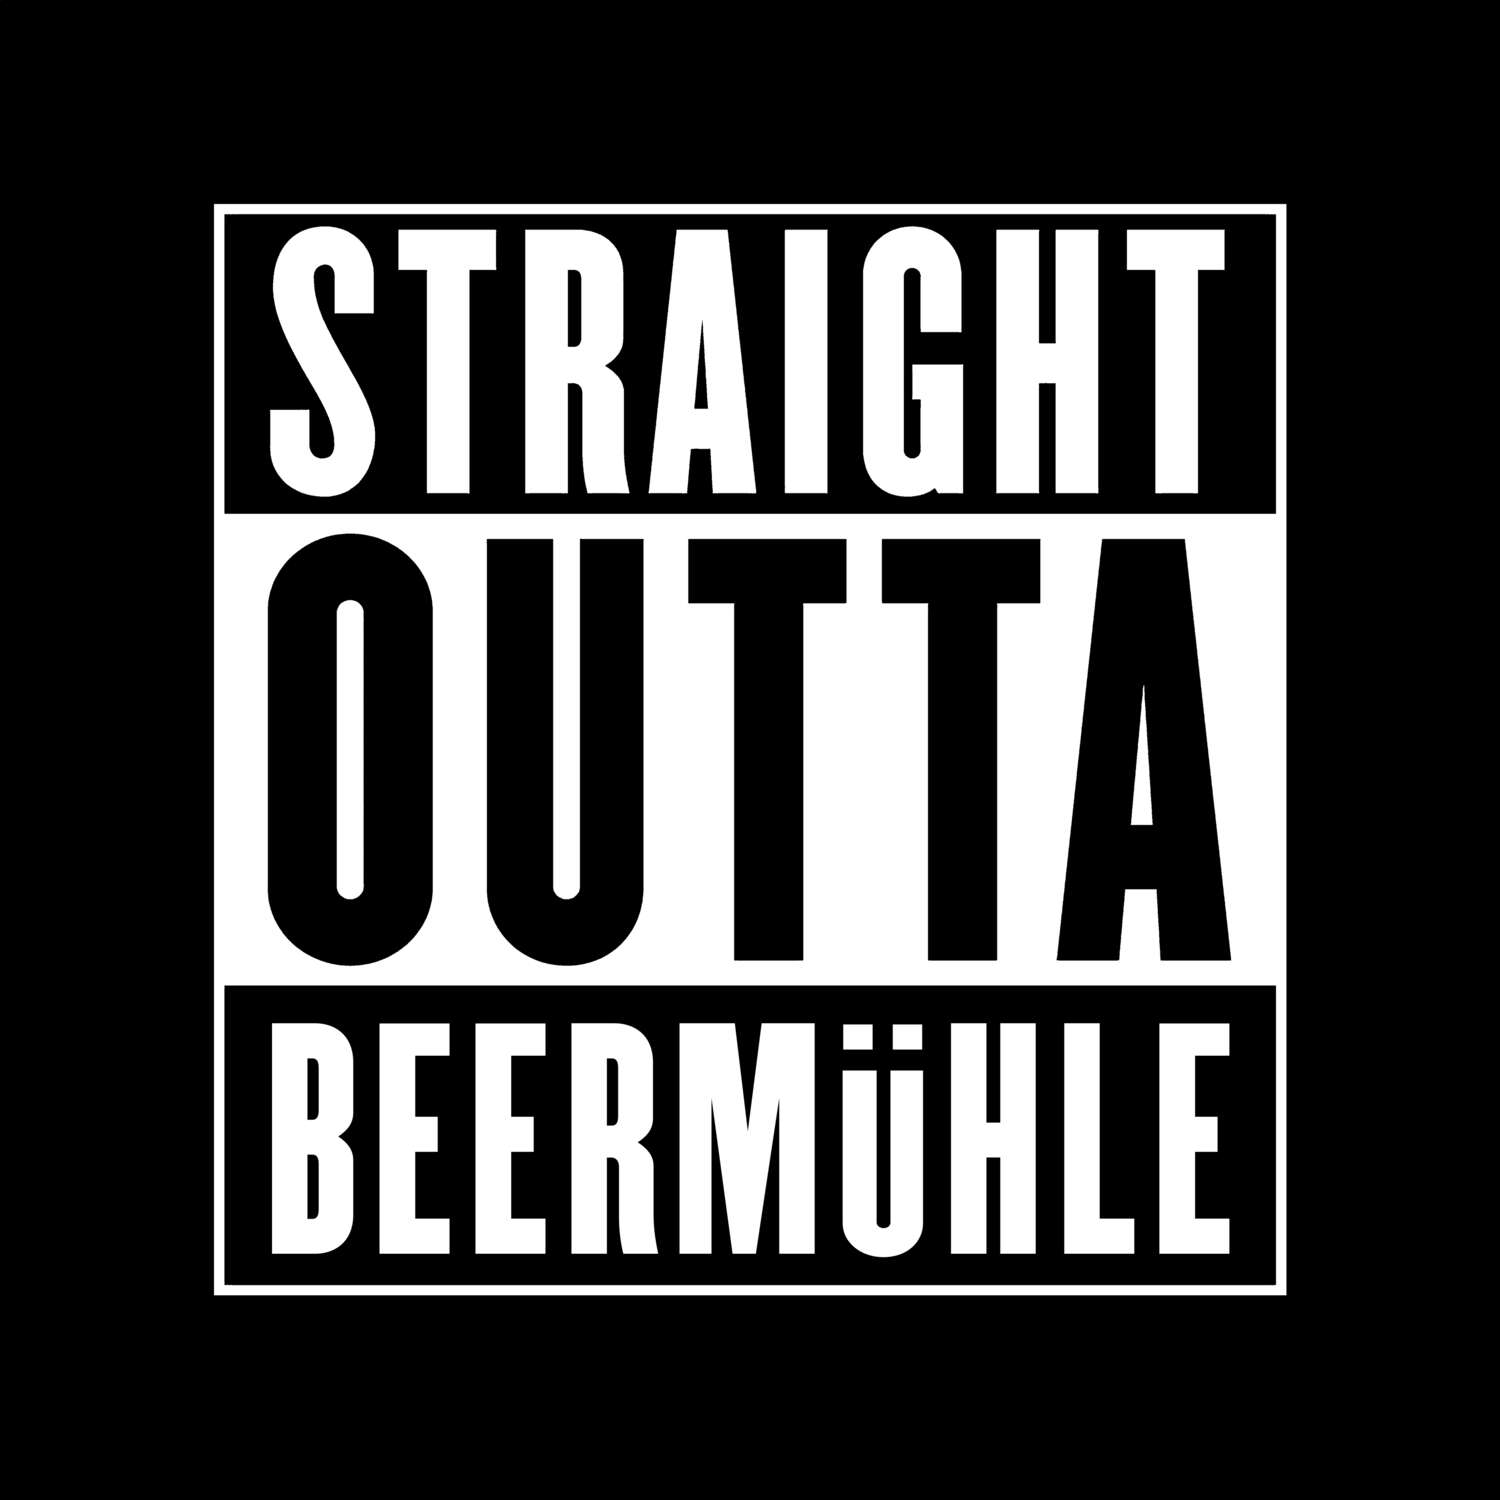 Beermühle T-Shirt »Straight Outta«